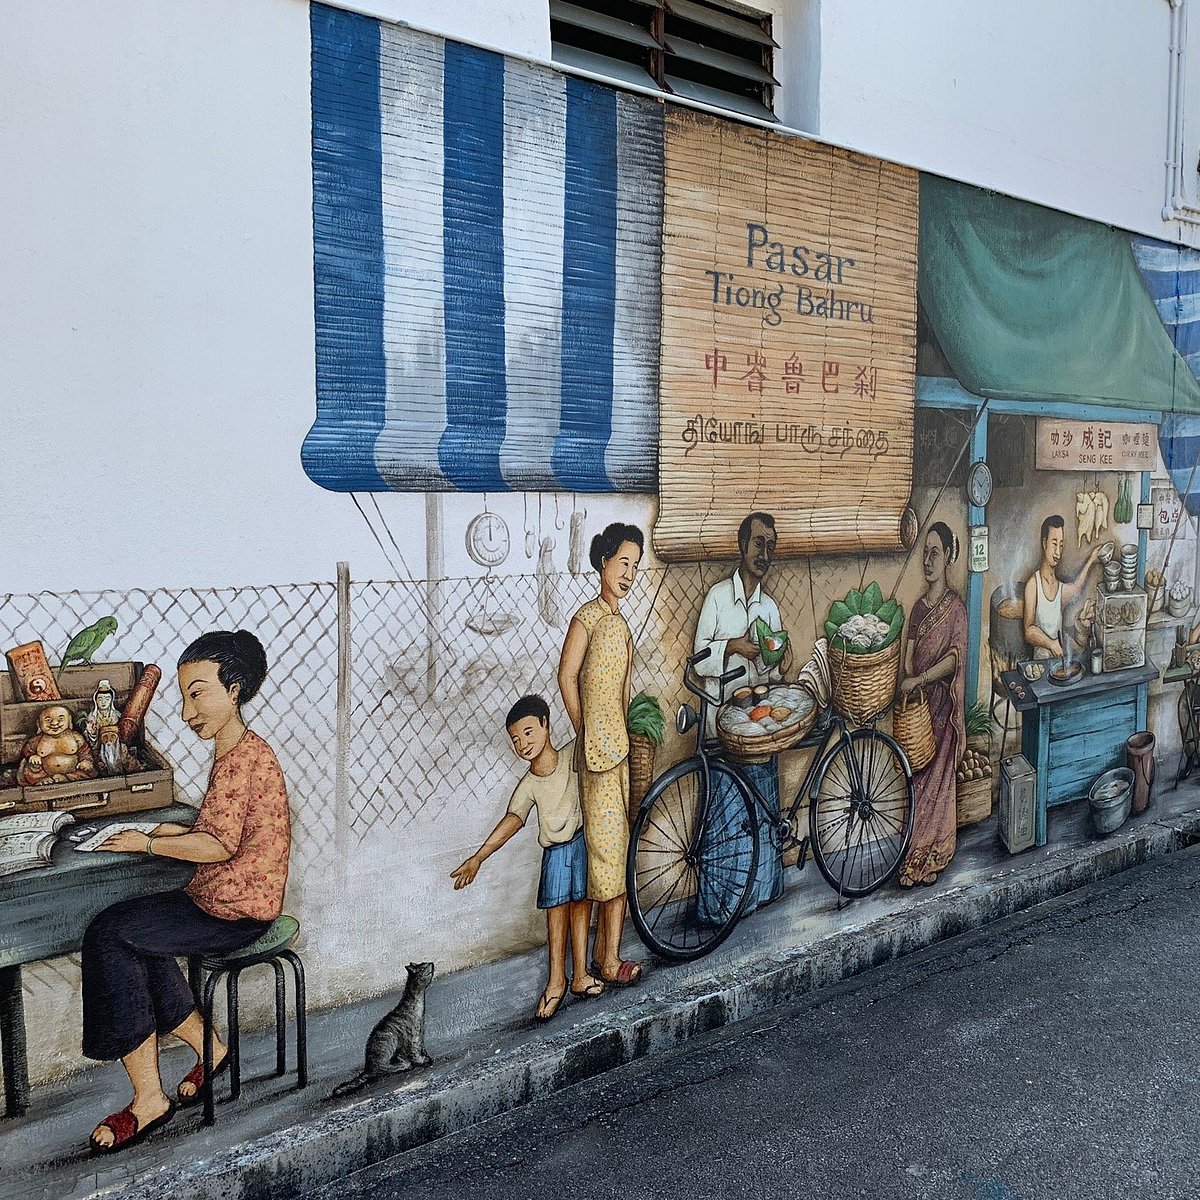 Mural : Tiong Bahru Pasar (Singapore) - All You Need to Know ...